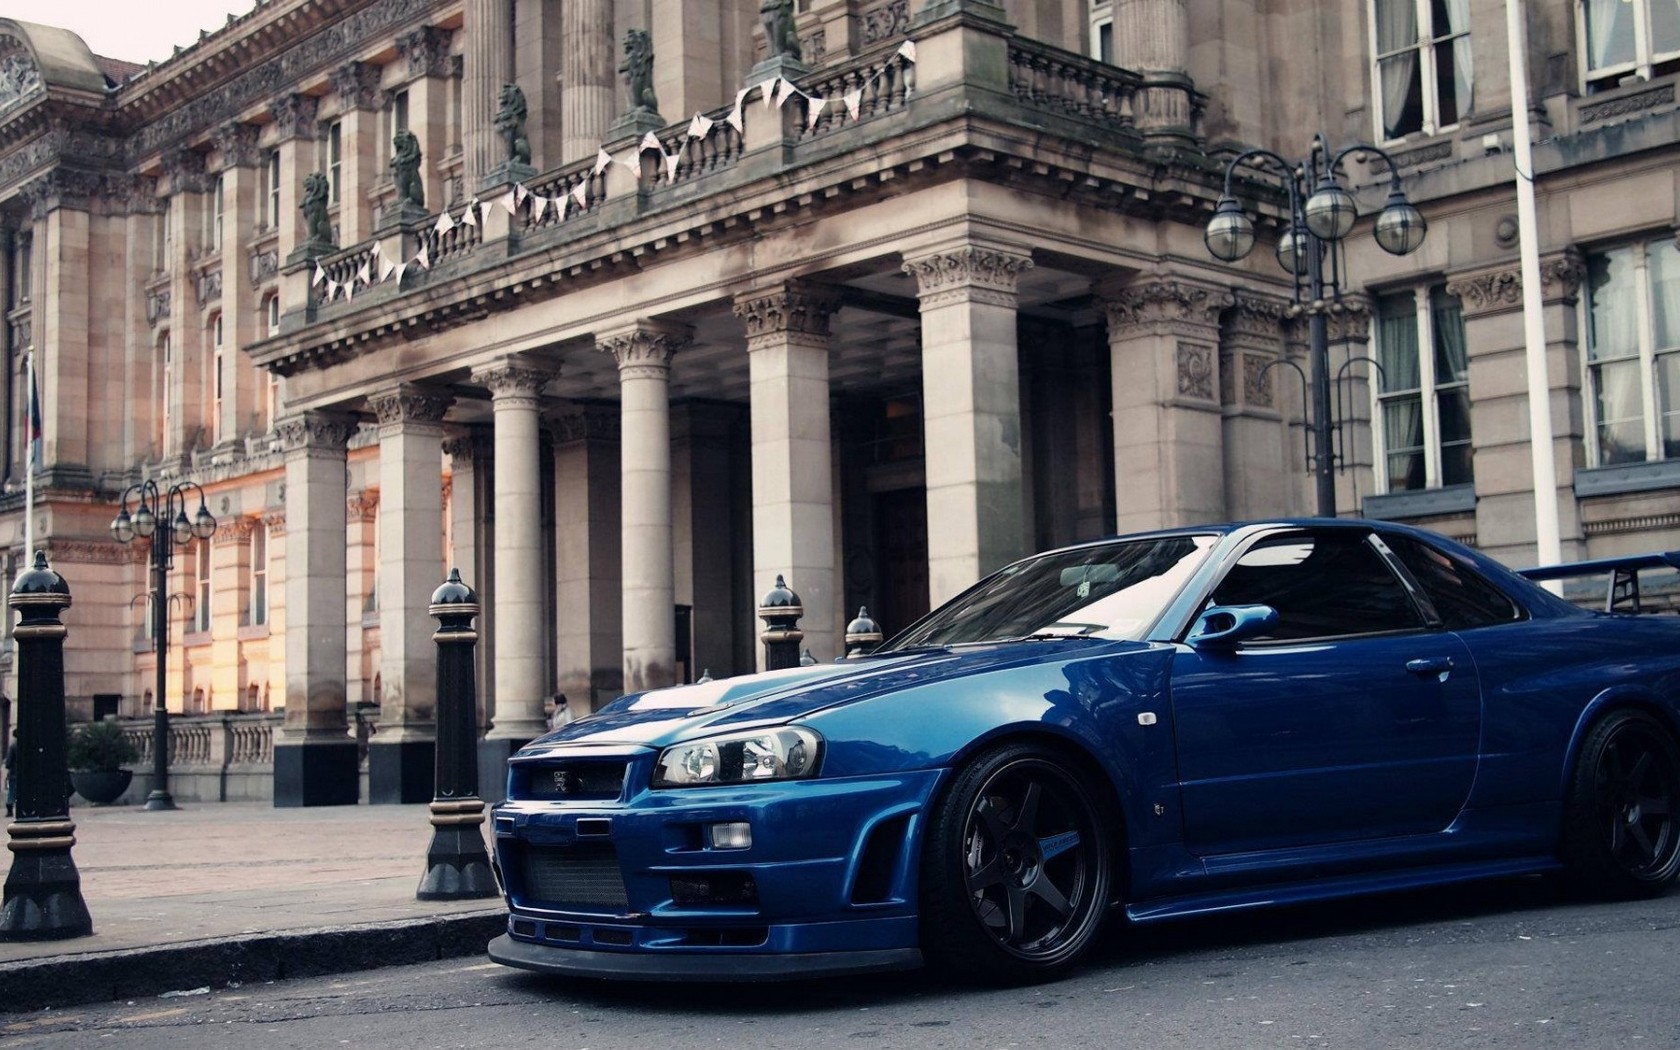 General 1680x1050 car blue cars architecture pillar reflection vehicle Nissan Skyline R34 Nissan Nissan Skyline front angle view